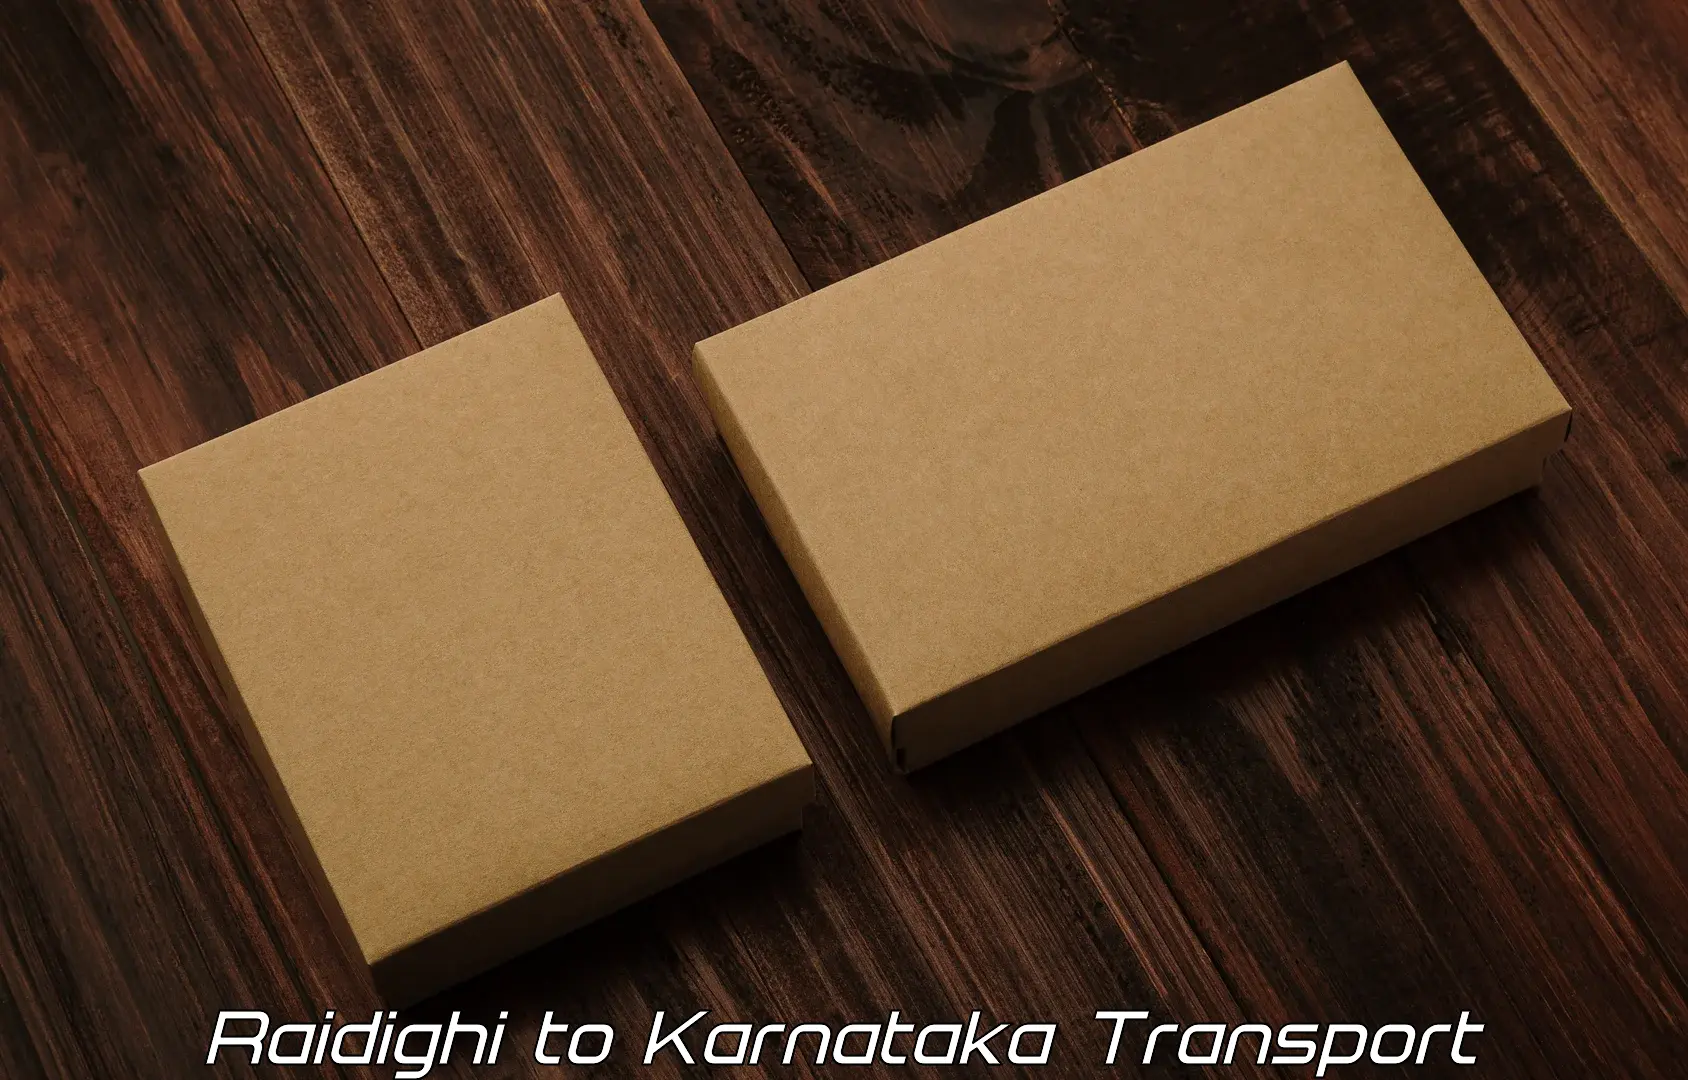 Vehicle transport services in Raidighi to Bangalore